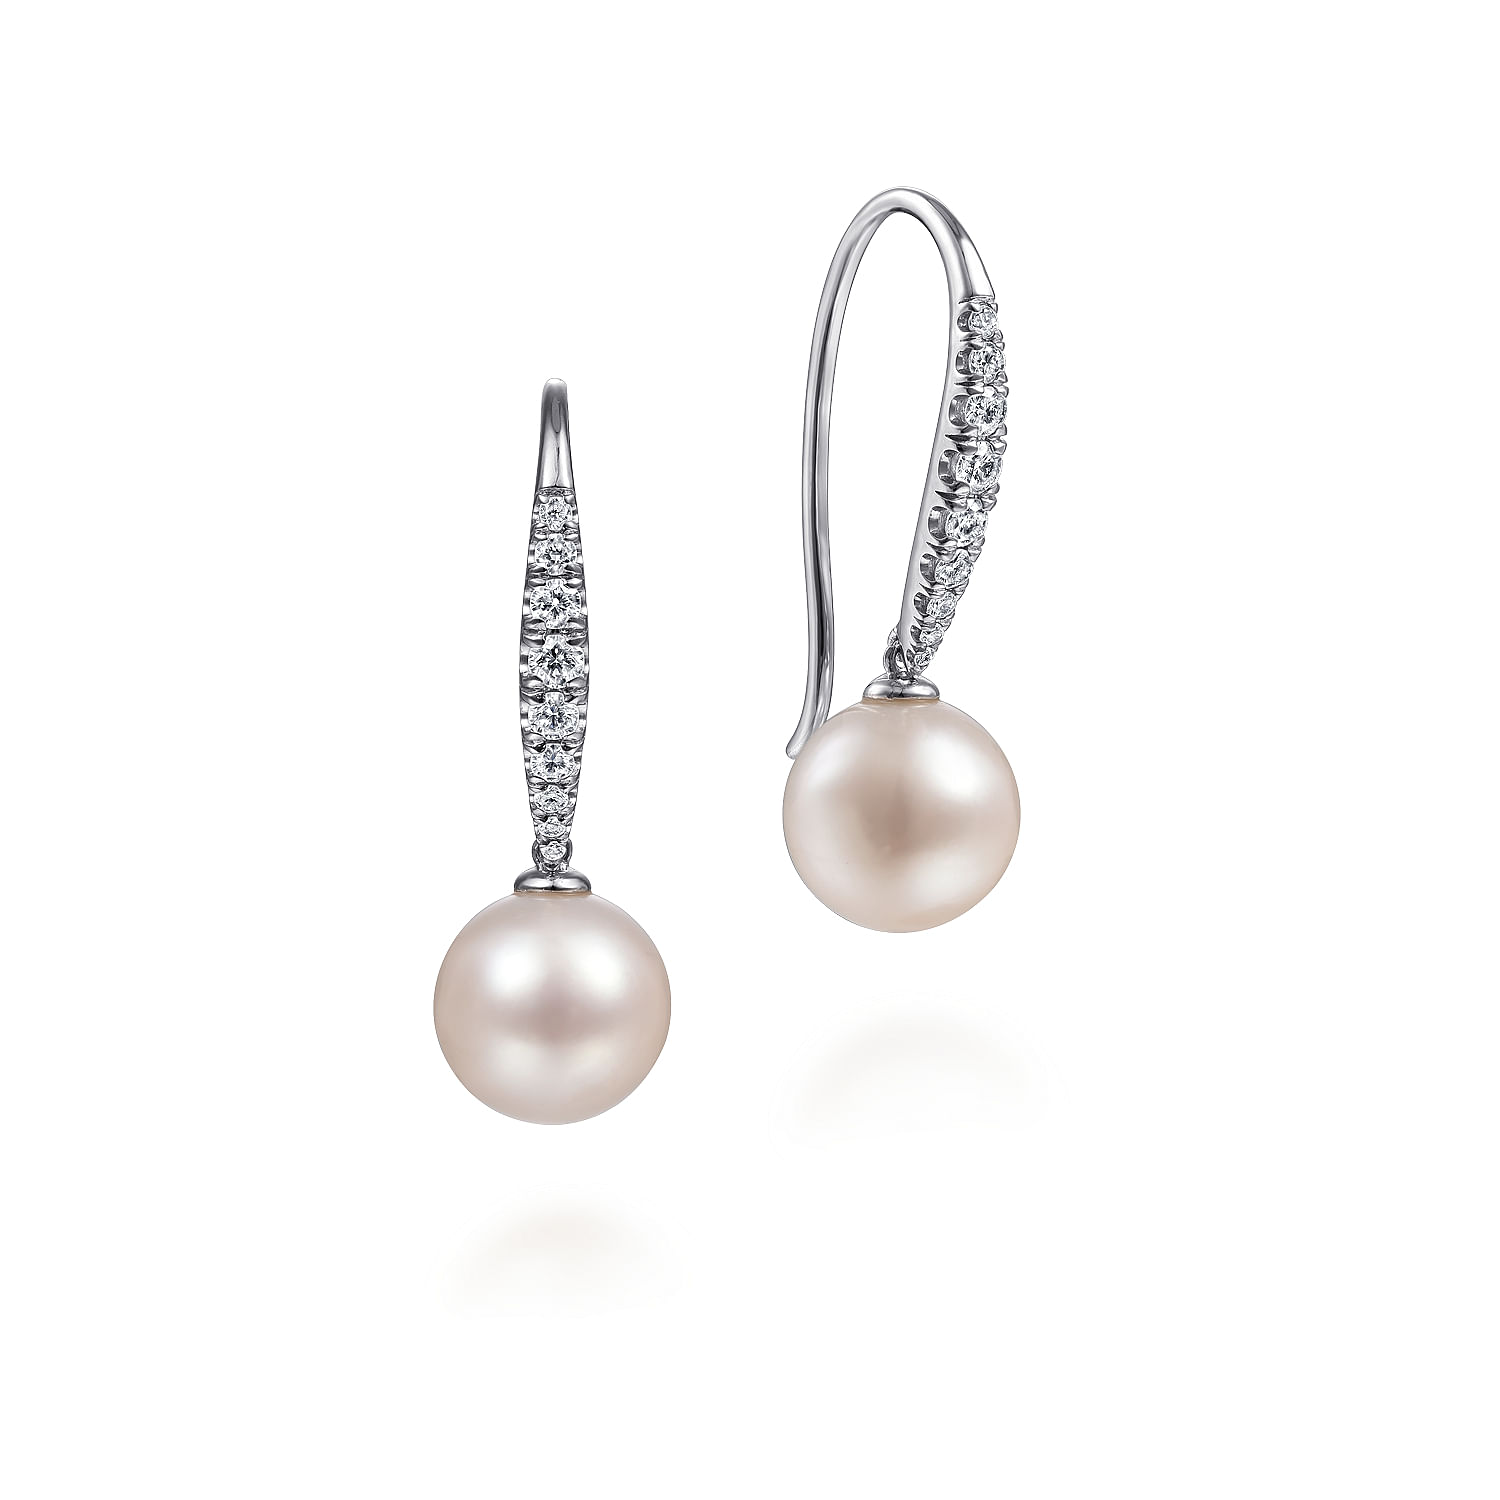 14K White Gold Diamond and Pearl Fish Wire Drop Earrings